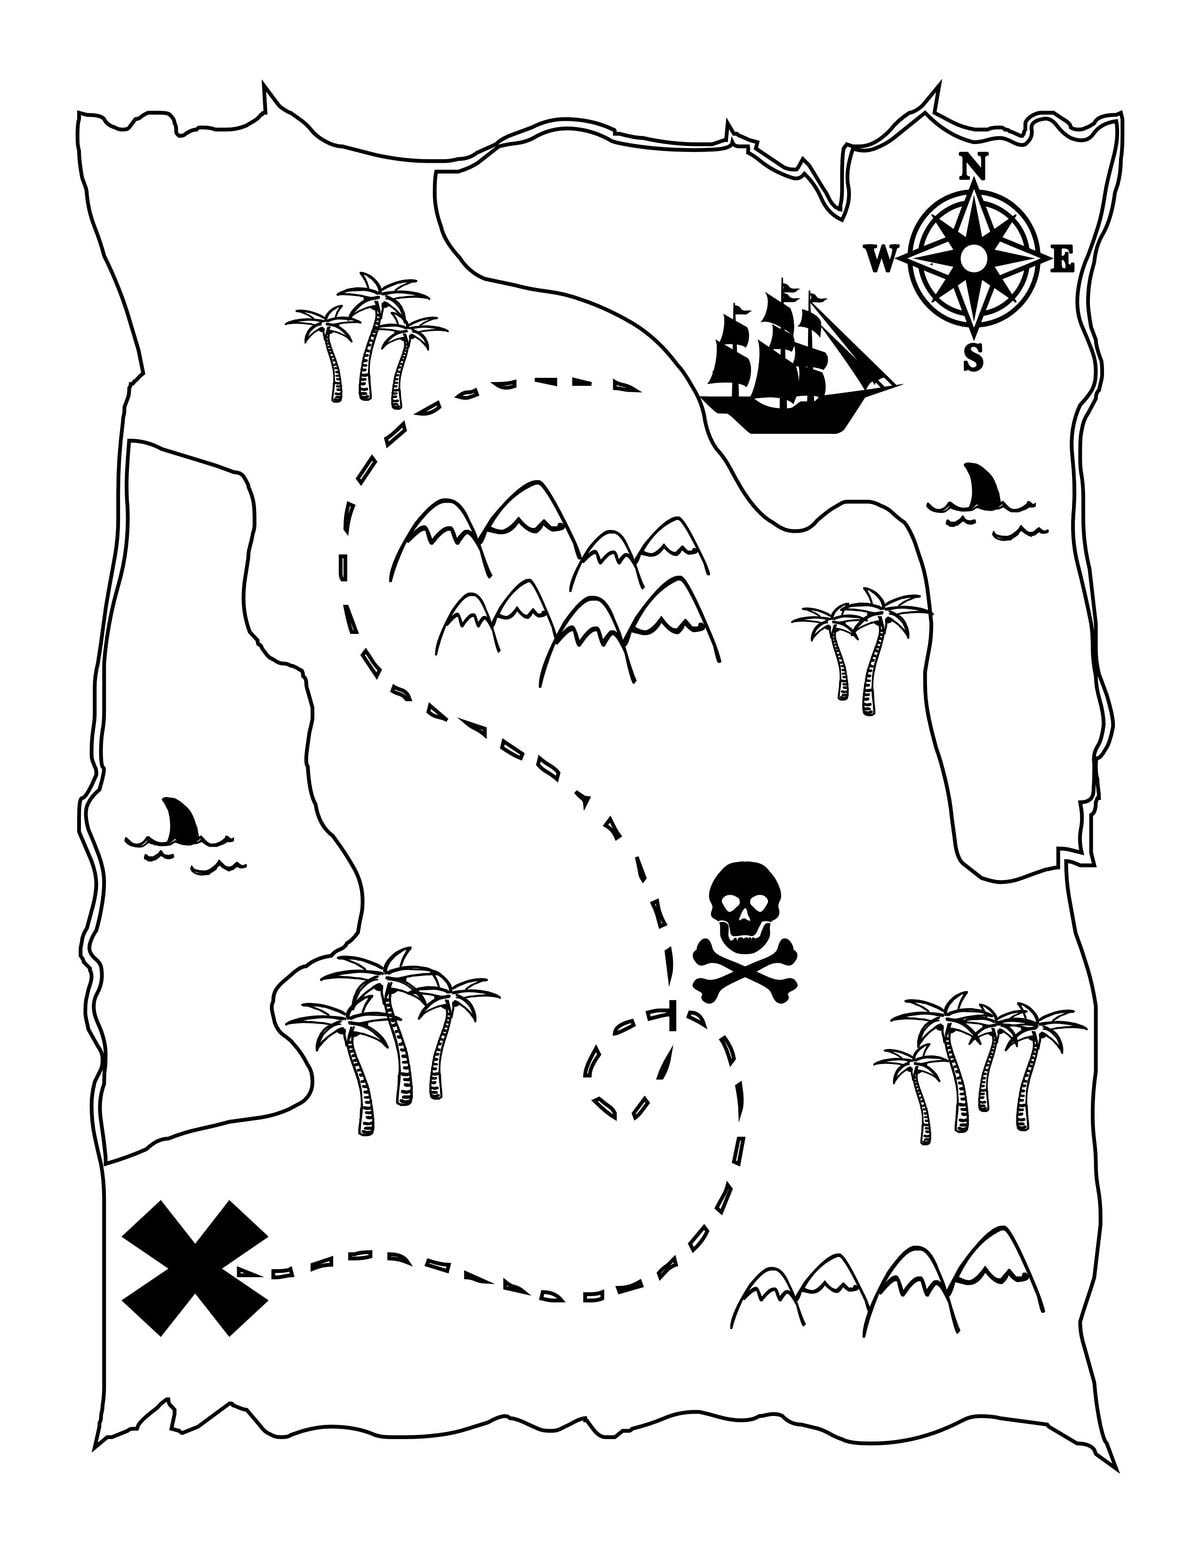 FREE Printable Pirate Map - a fun coloring page for the kids! { lilluna.com }